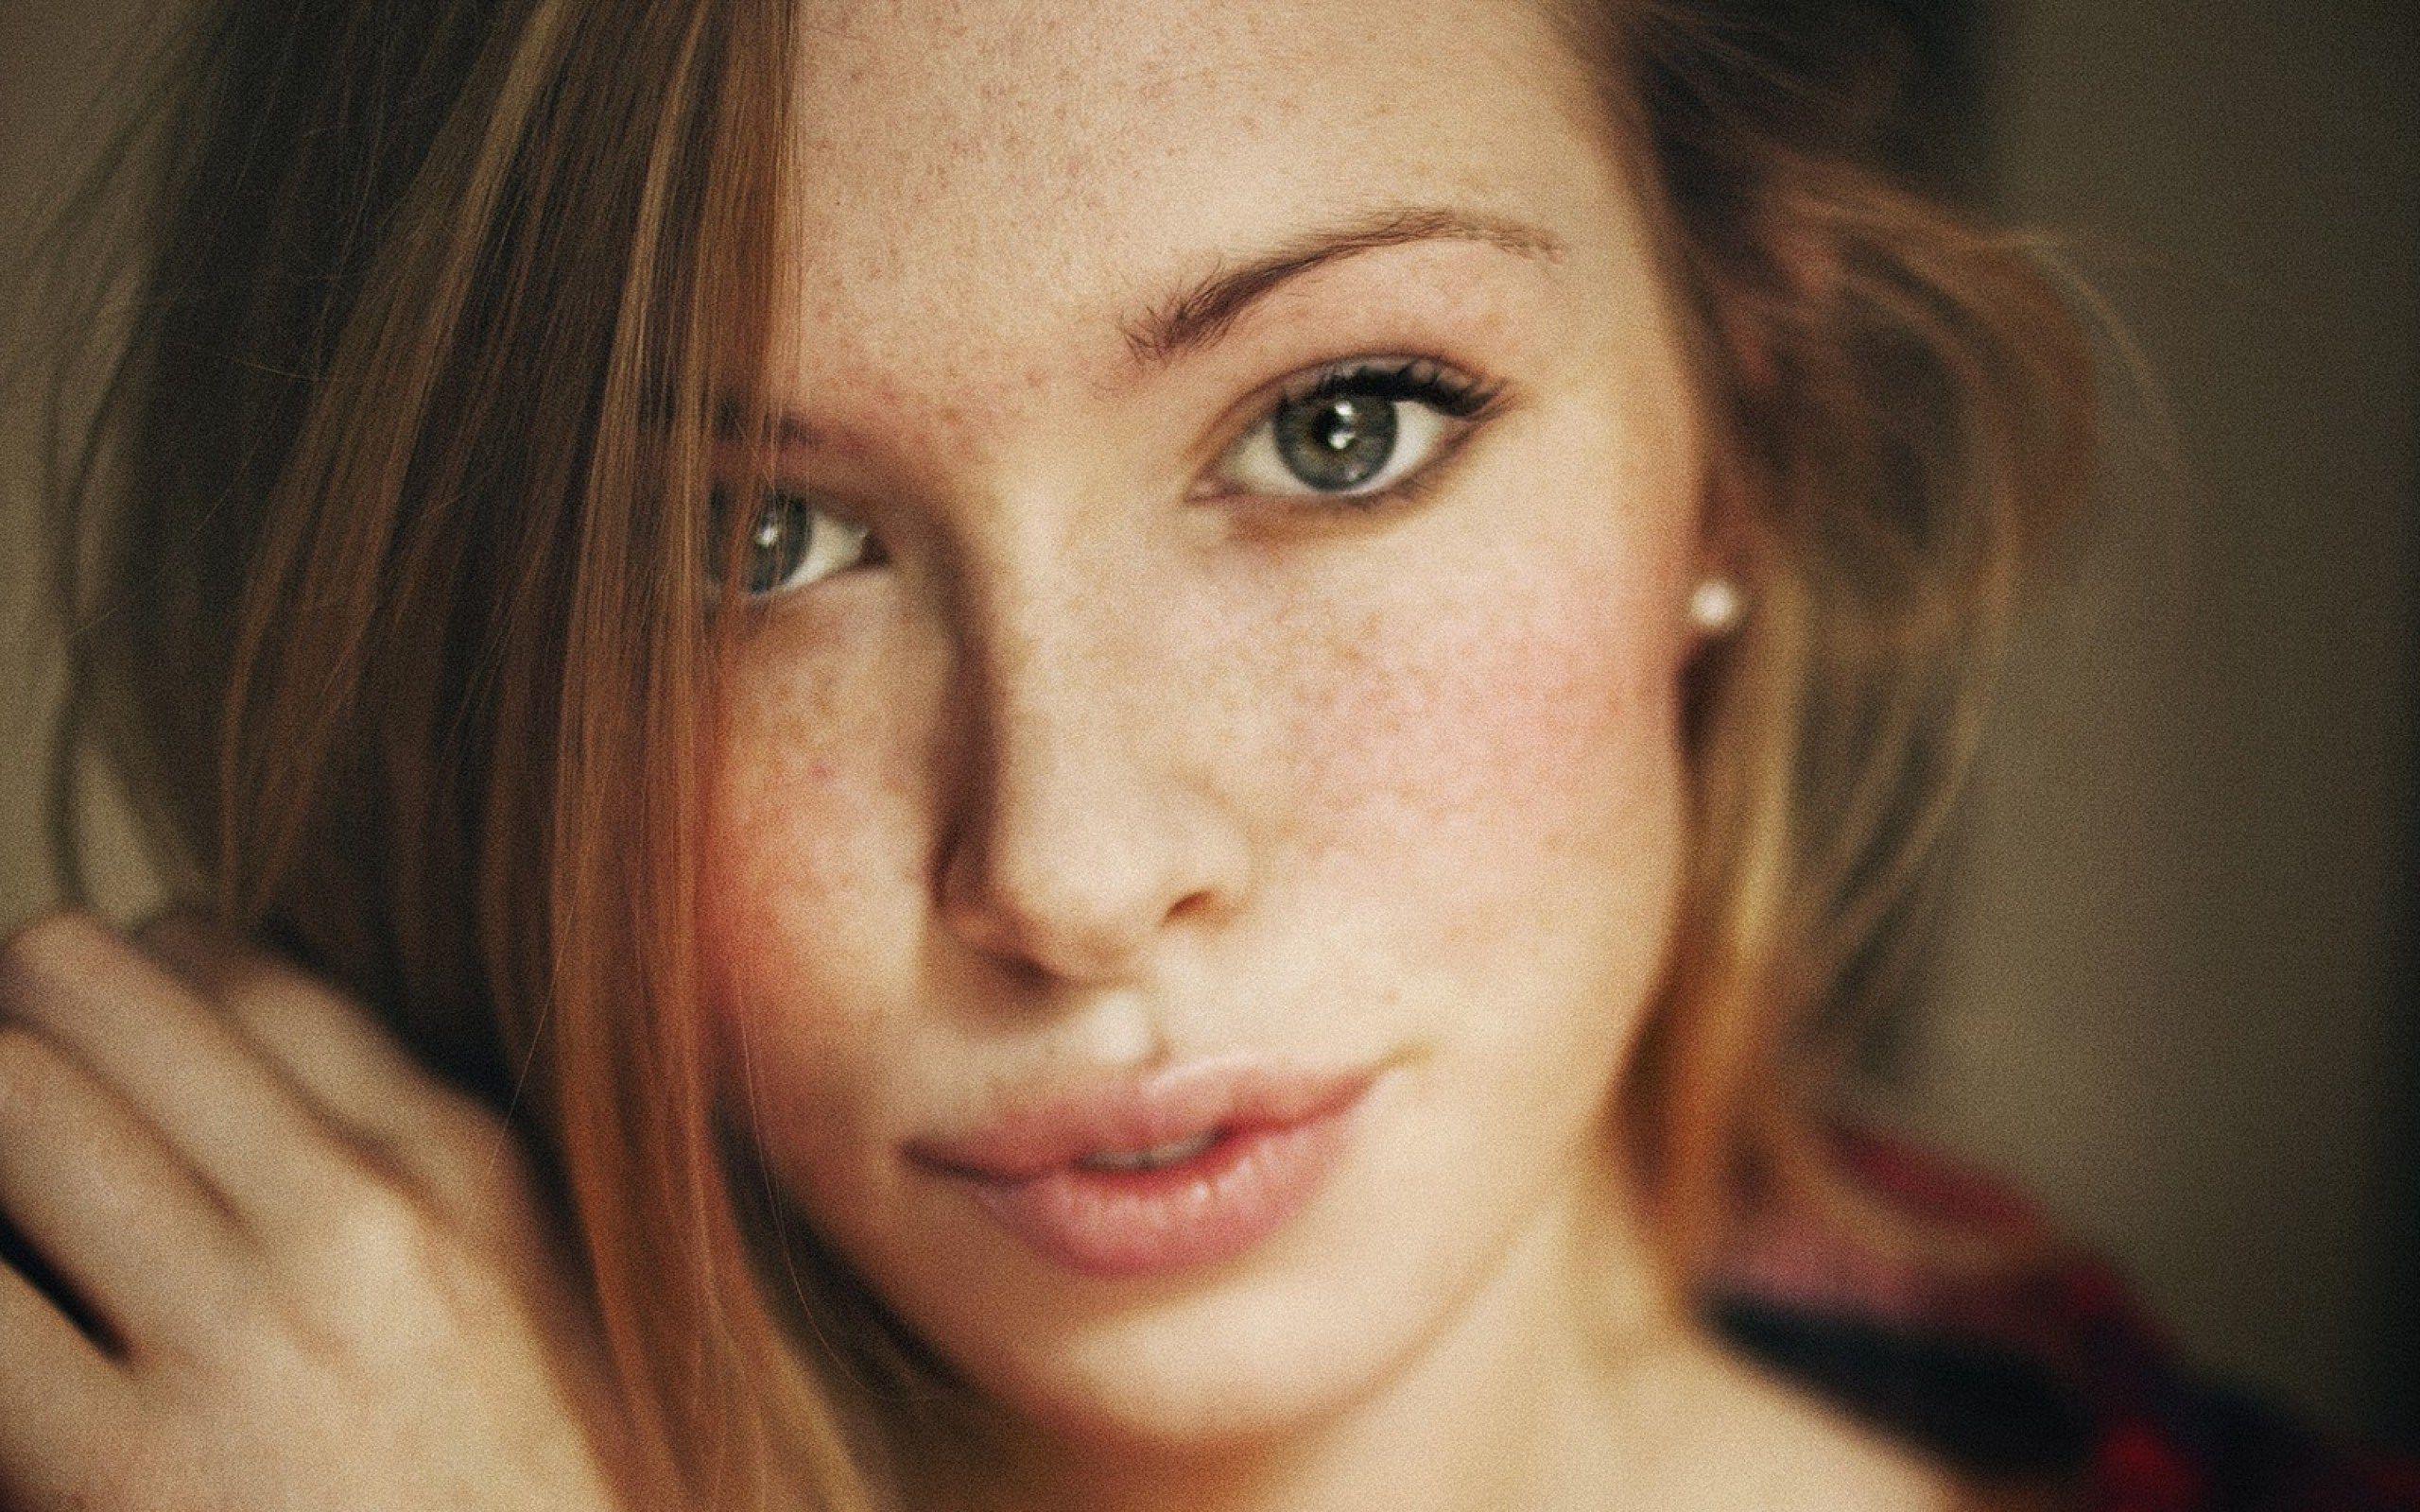 Brown hair with freckles